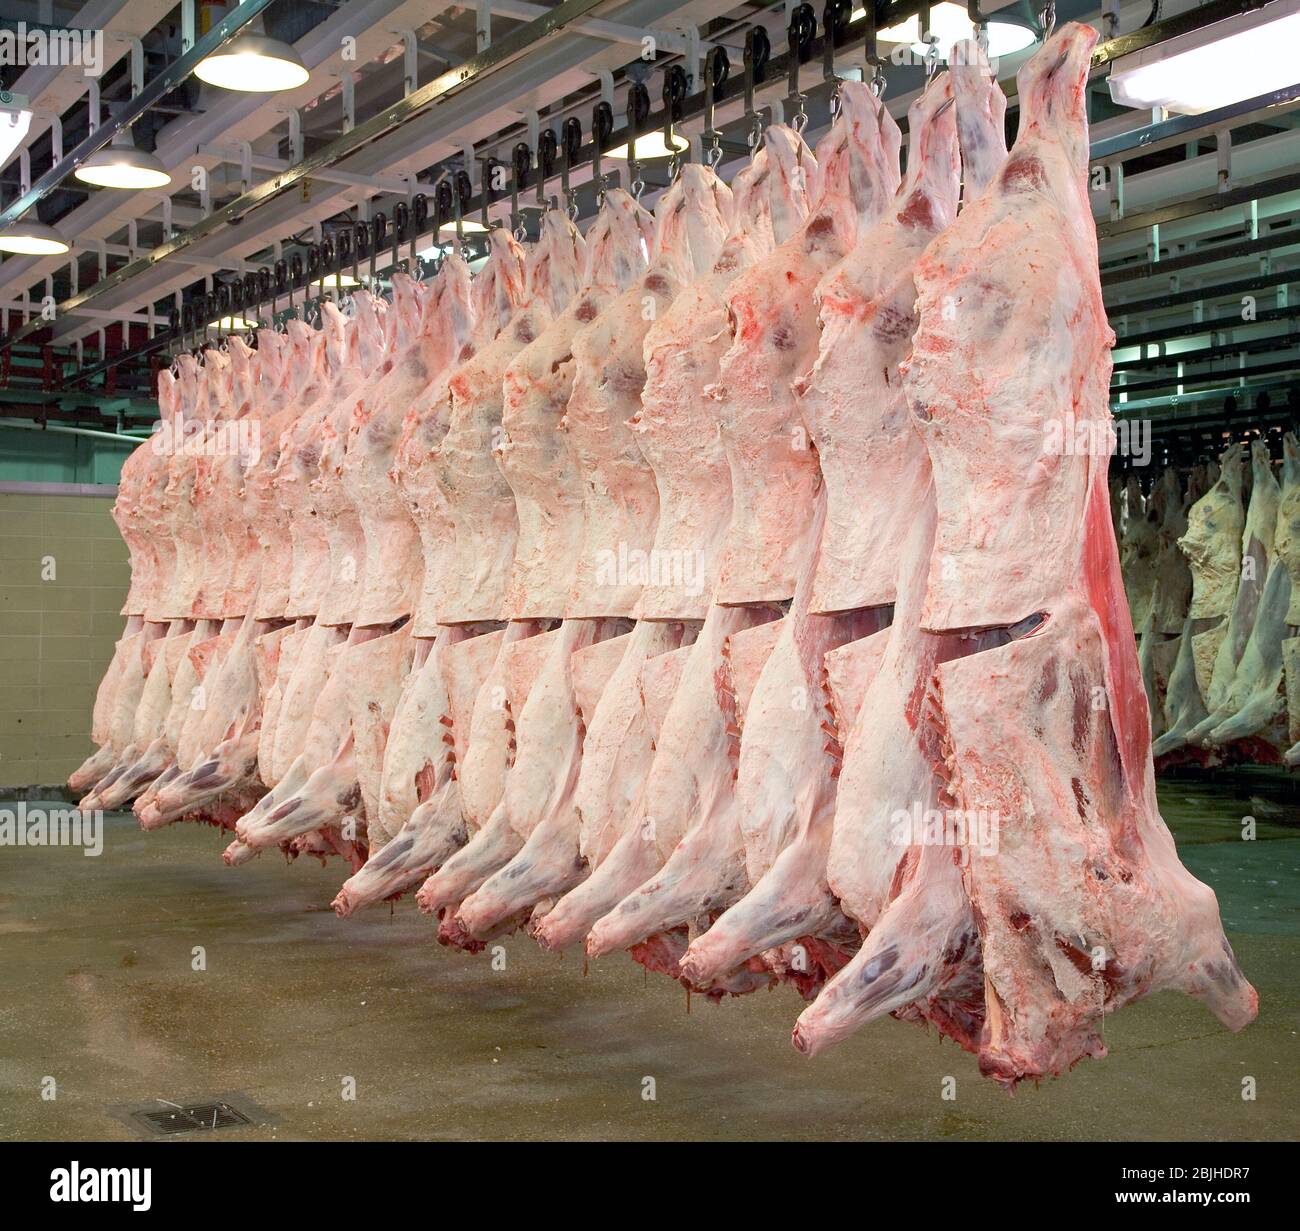 Freshly slaughtered beef carcasses hanging in a refrigerated cooler of the meat processing plant. The loin eye is exposed to determine the quality. Stock Photo